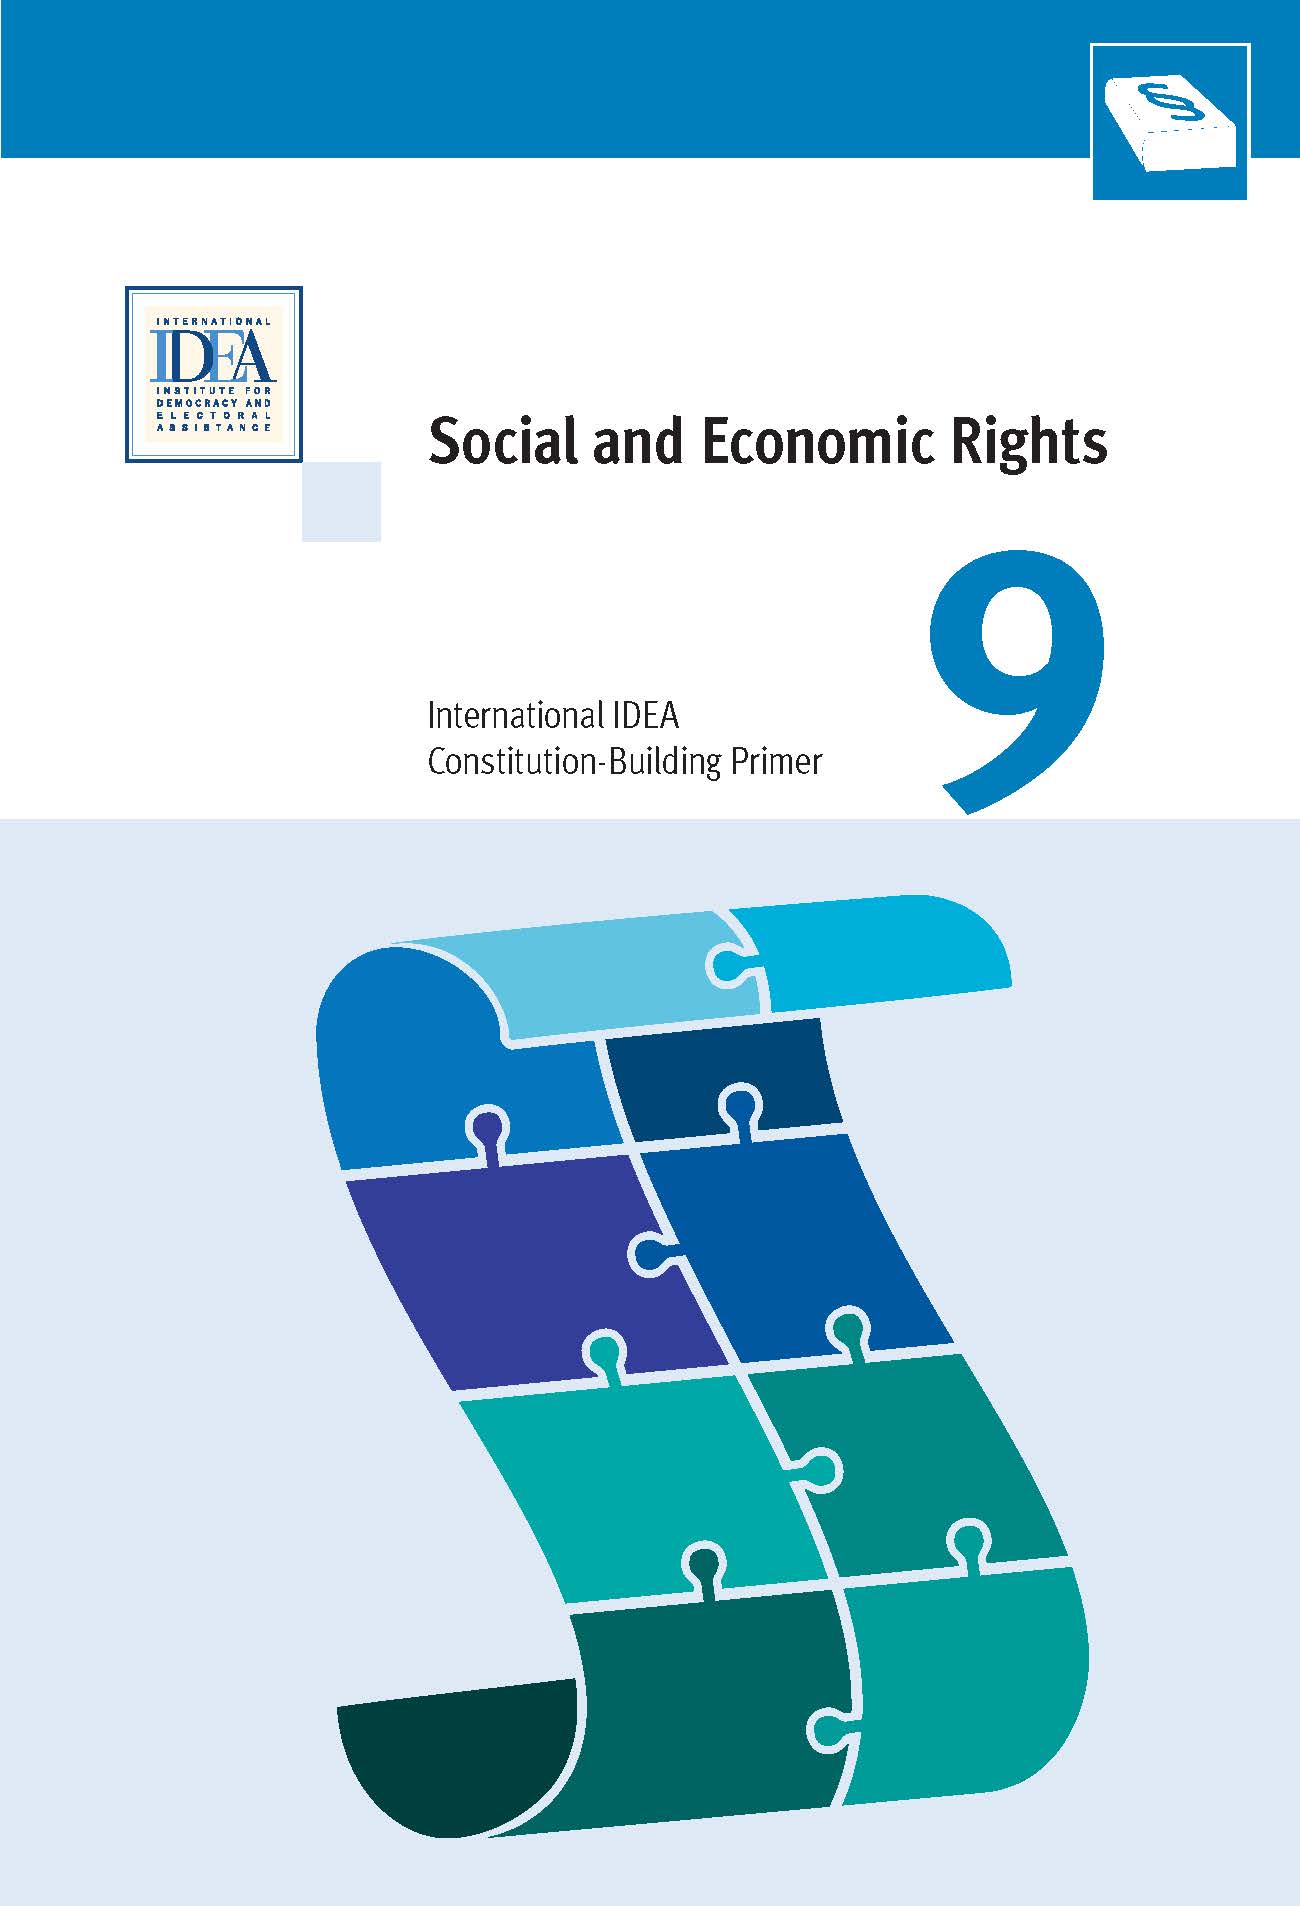 assignment of economic rights